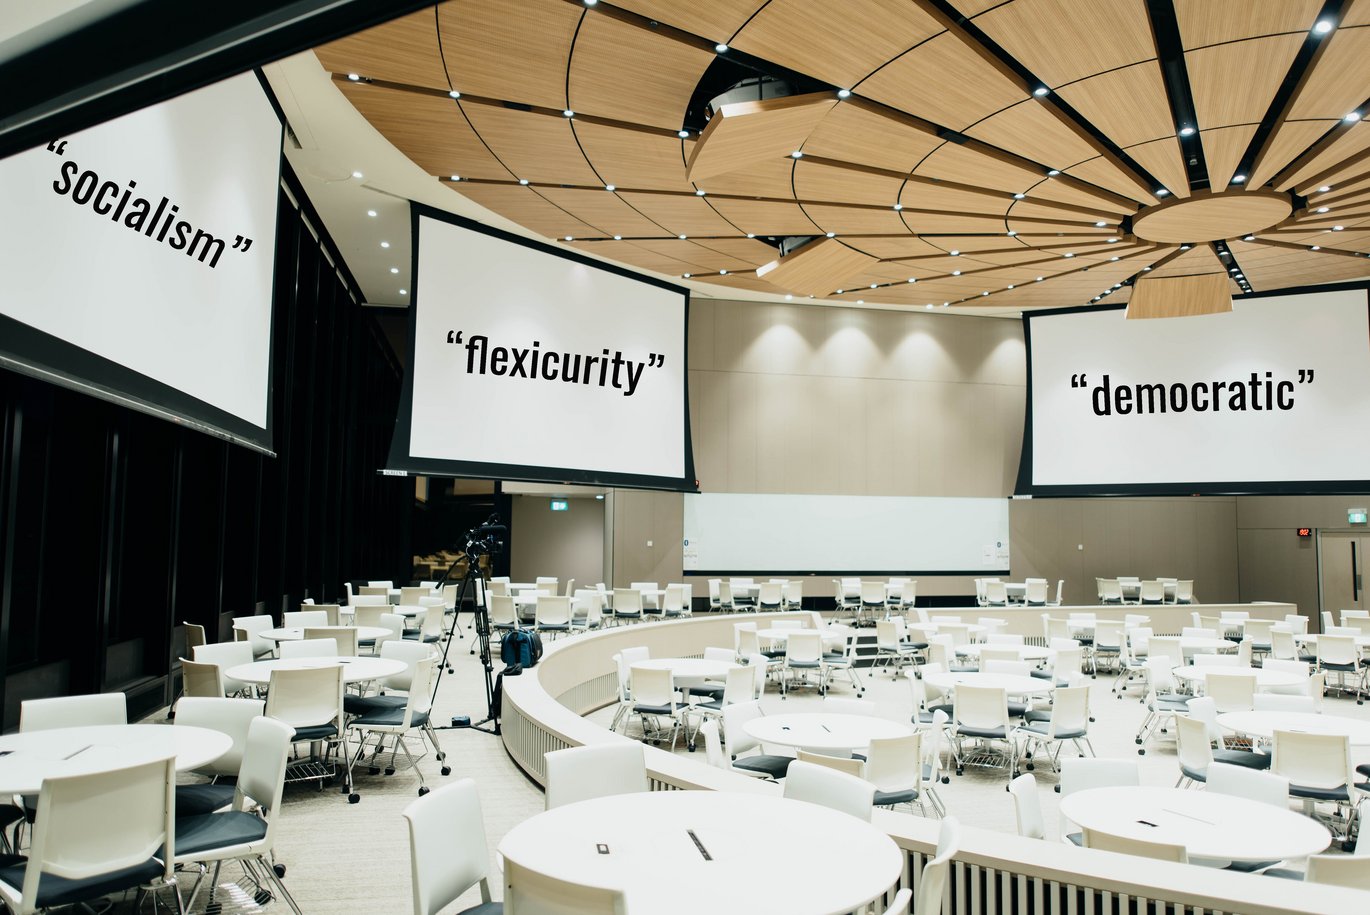 Large conference room with white upholstery with three large screens with "socialism", "flexicurity" and "democratic" on them.